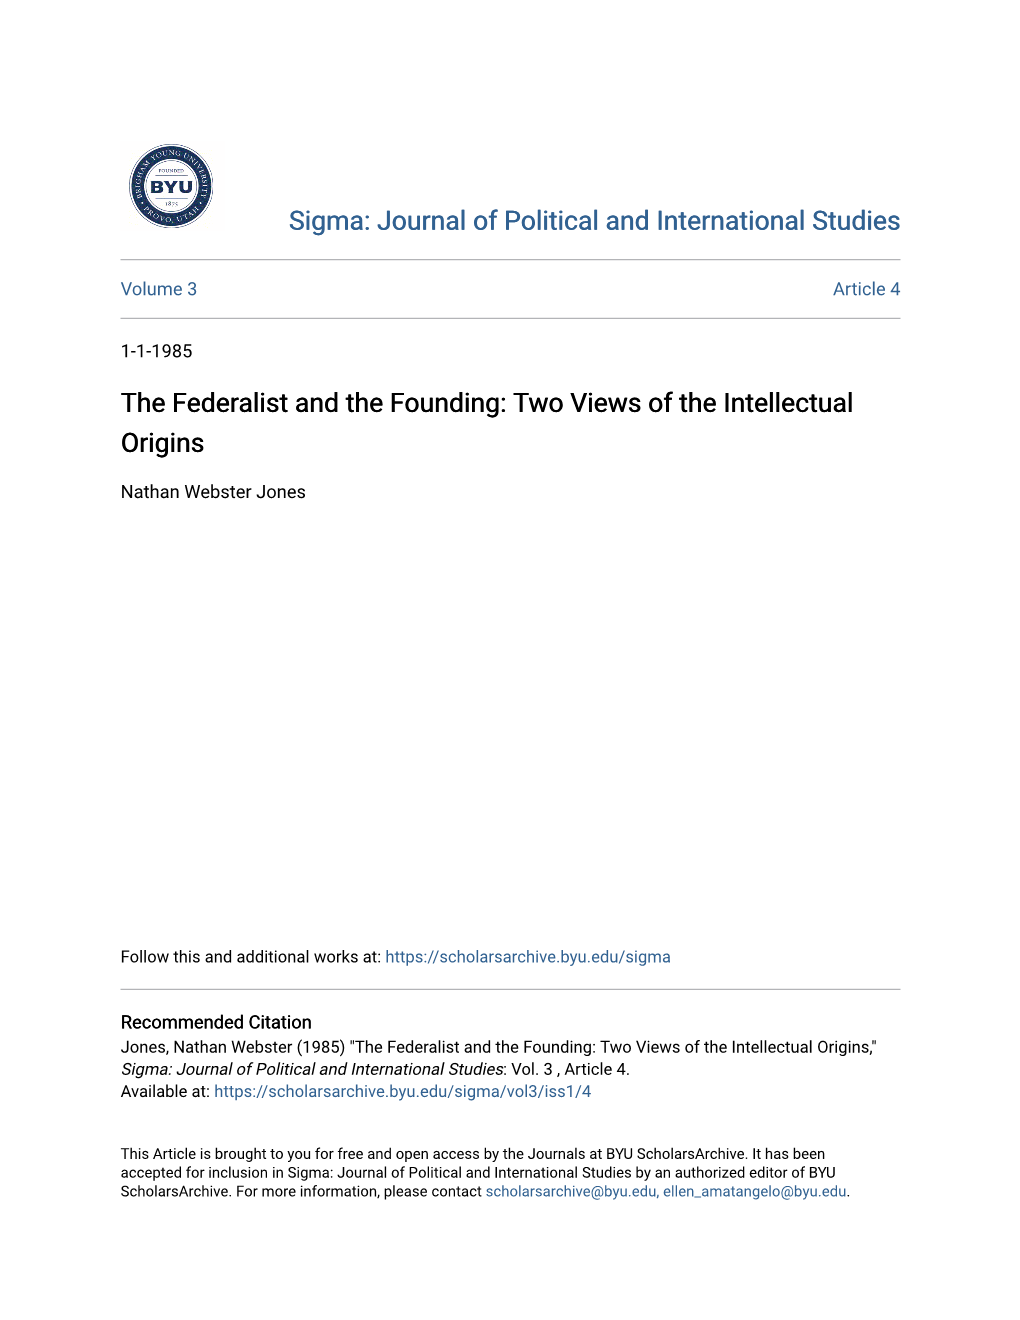 The Federalist and the Founding: Two Views of the Intellectual Origins